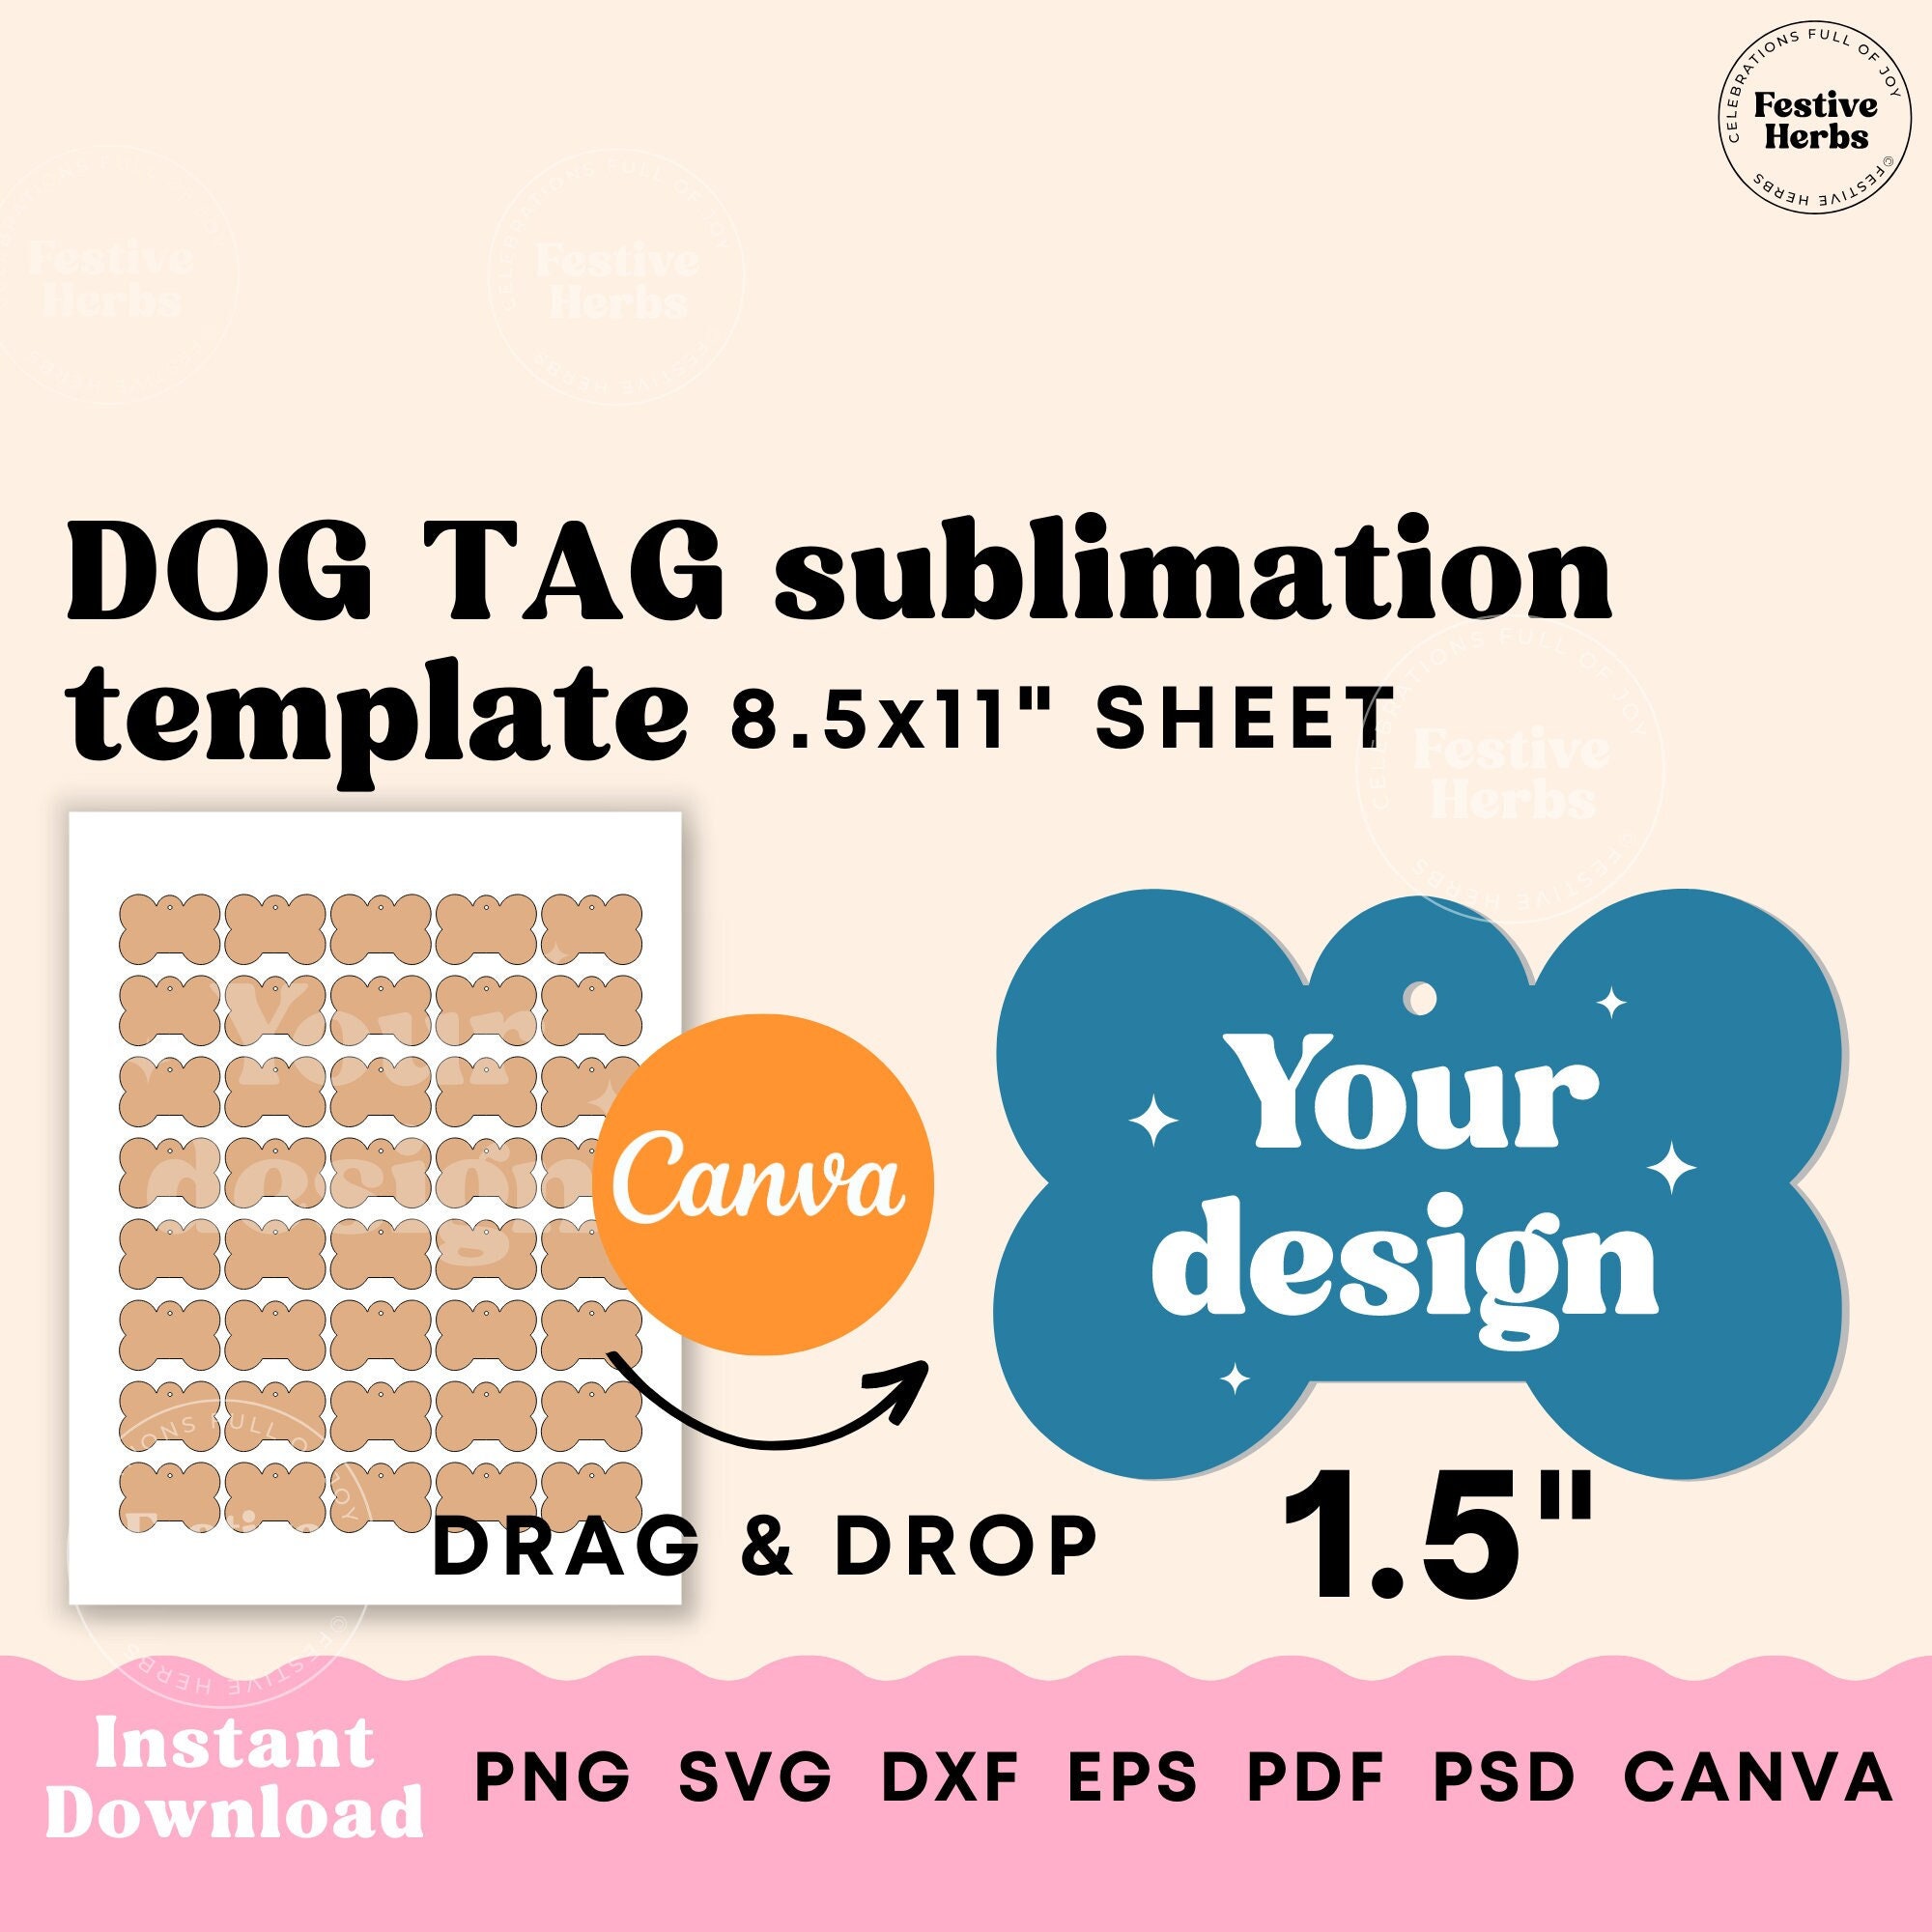 Neon Triangle Sublimation Dog Tag PNG Graphic by Mini Craft Corner ·  Creative Fabrica